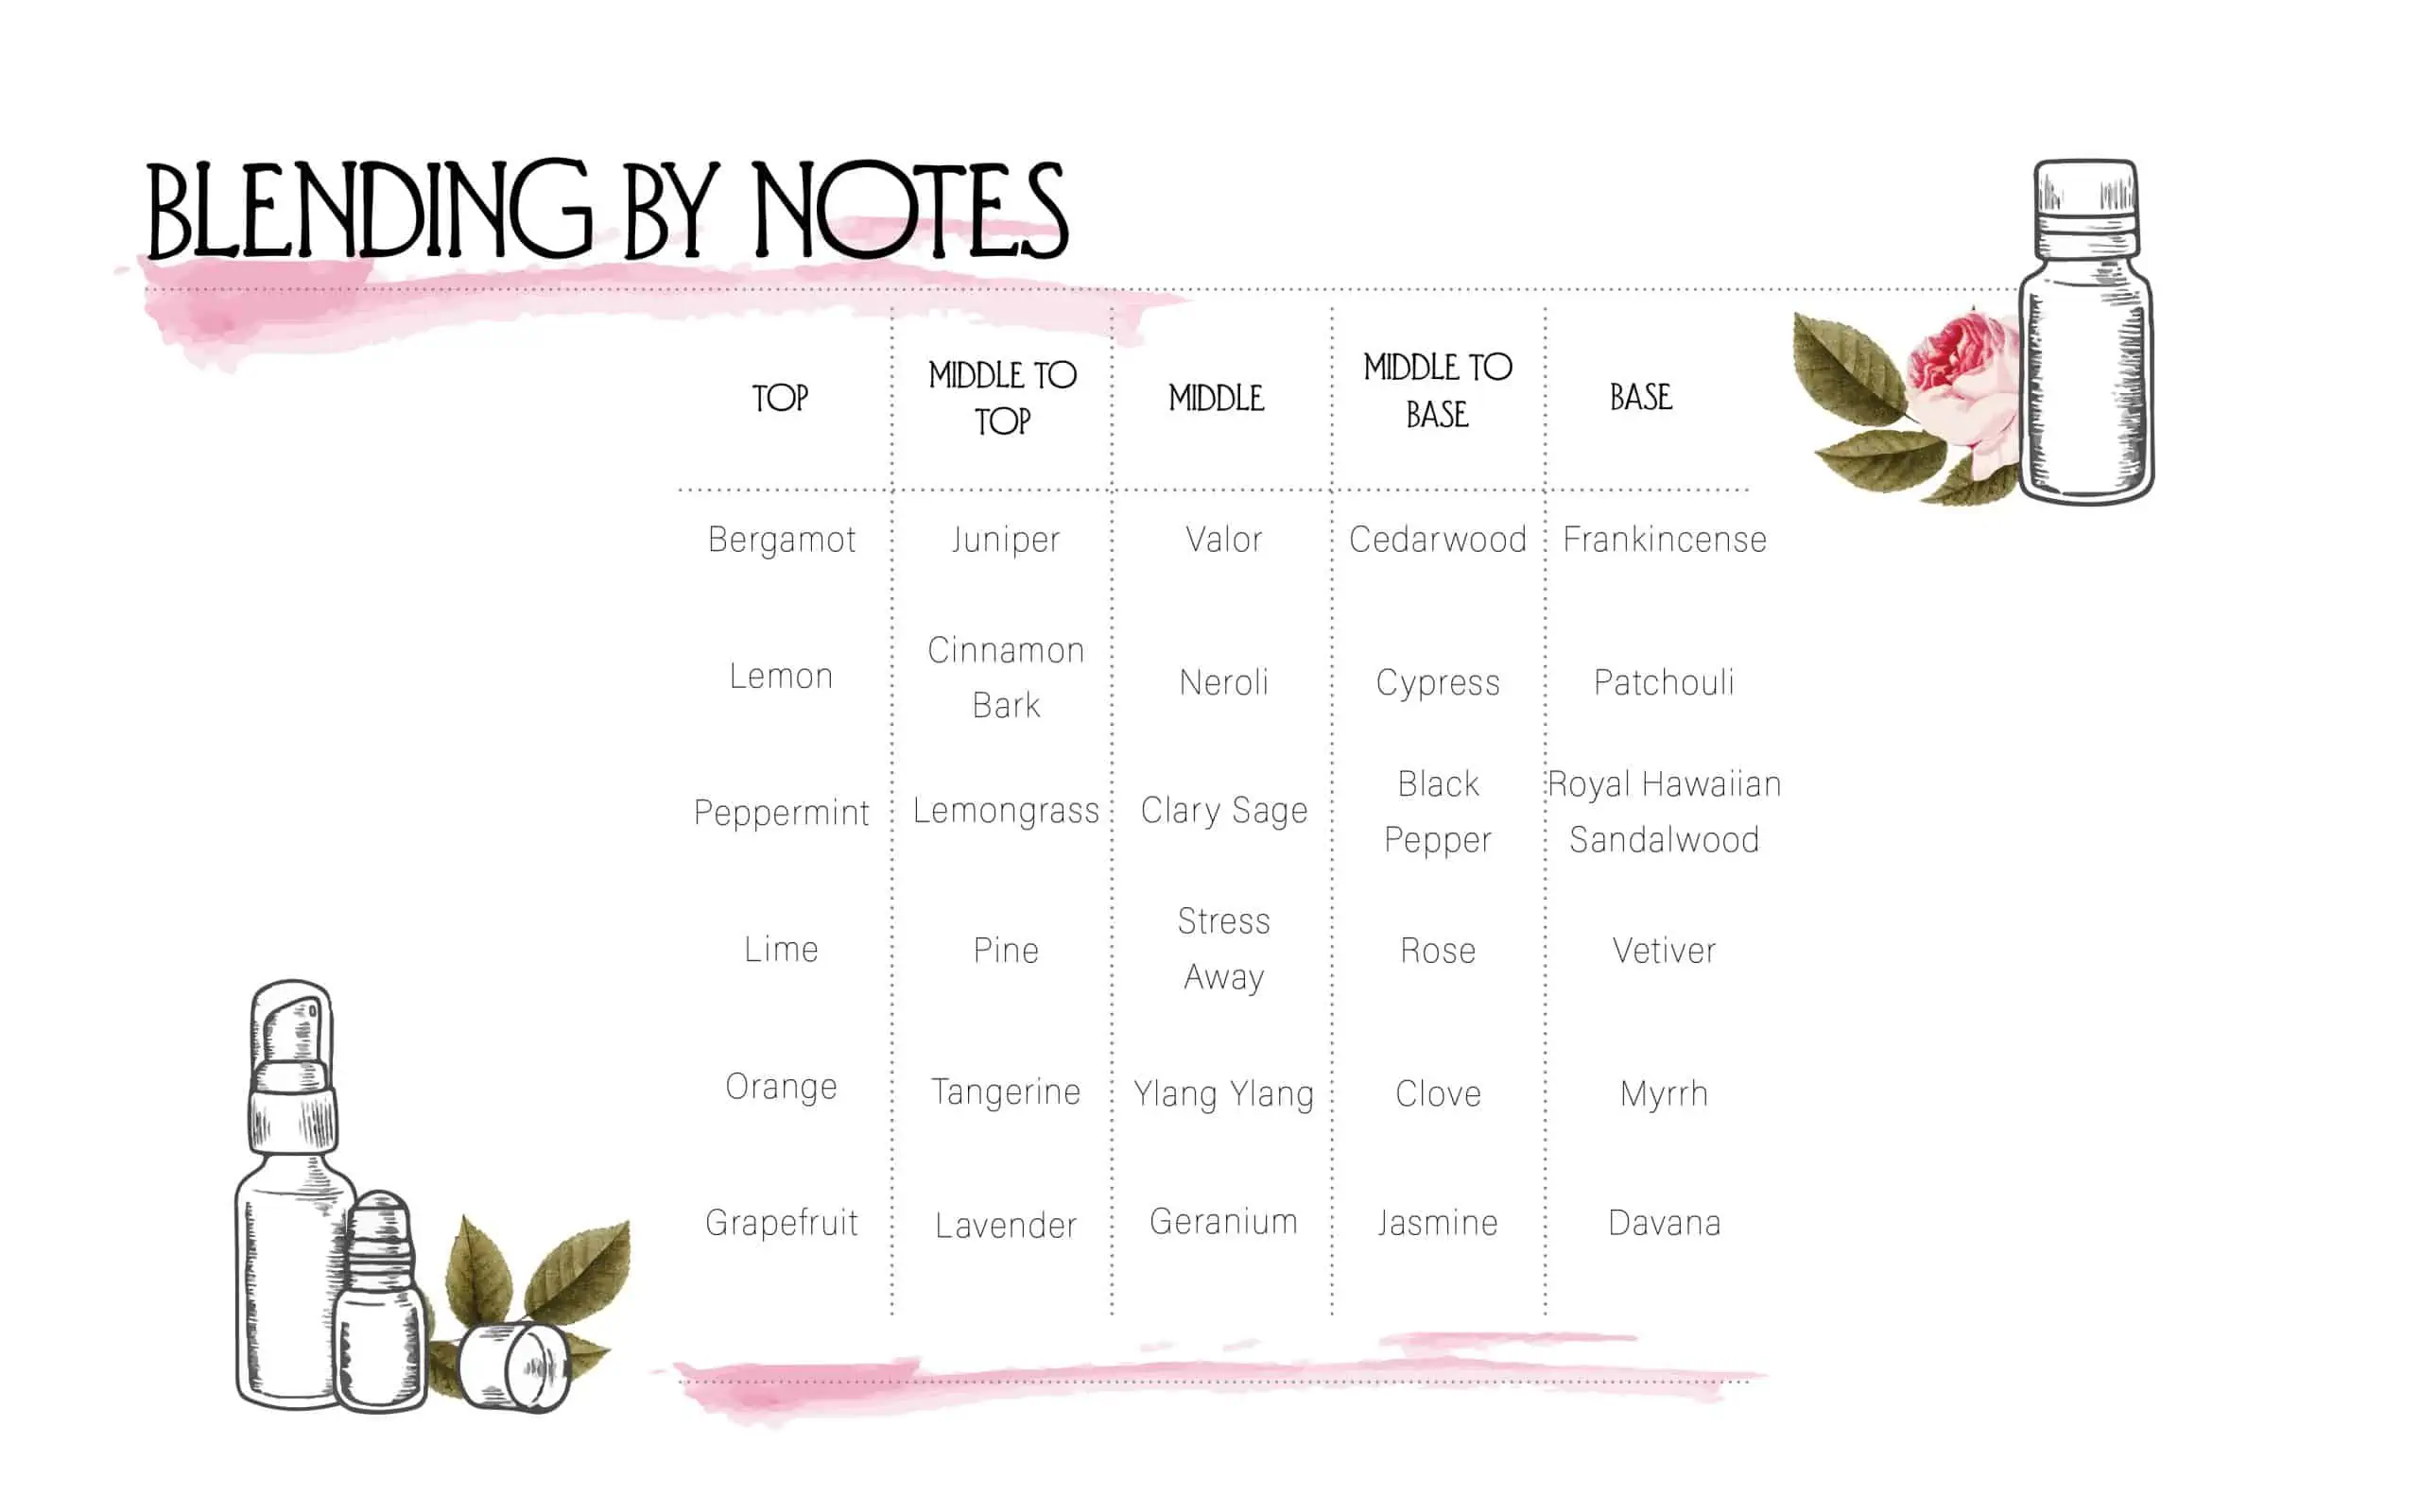 Blending by Notes chart